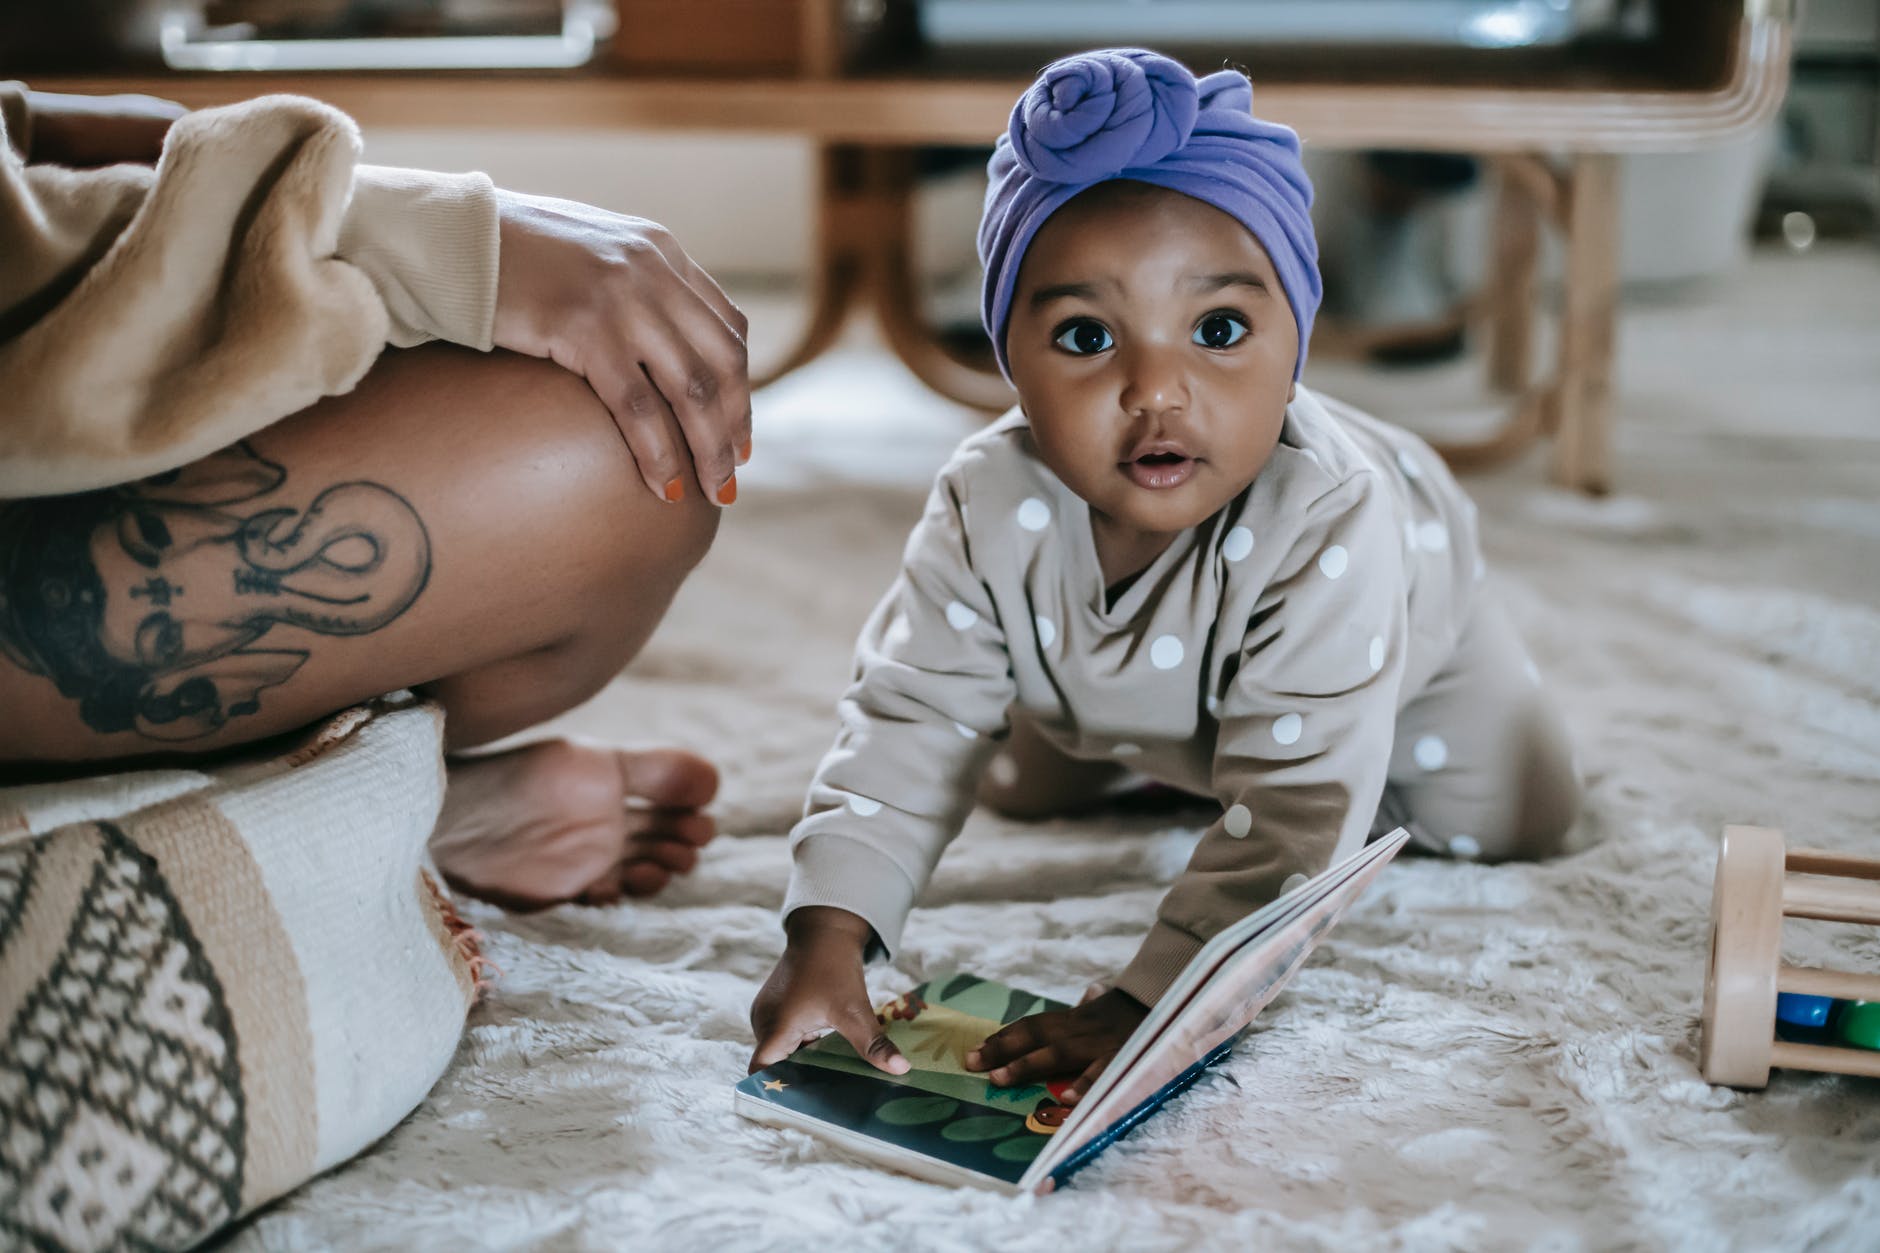 Baby reading book with single mother in background

Photo by William  Fortunato on Pexels.com